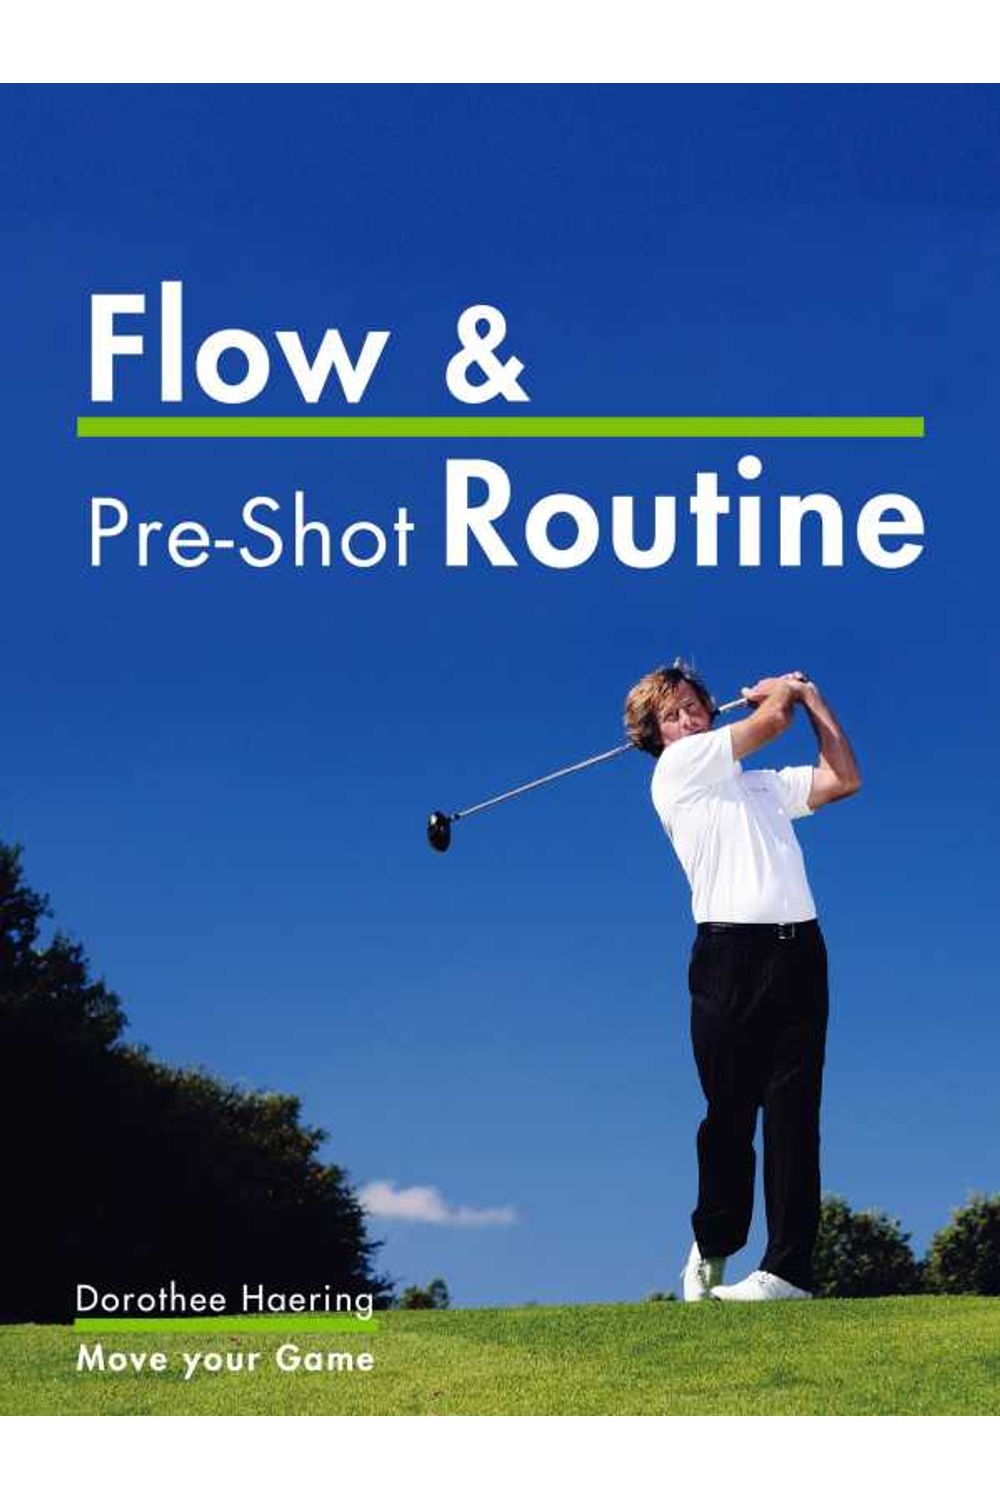 bw-flow-amp-preshot-routine-golf-tips-move-your-game-9783000404184